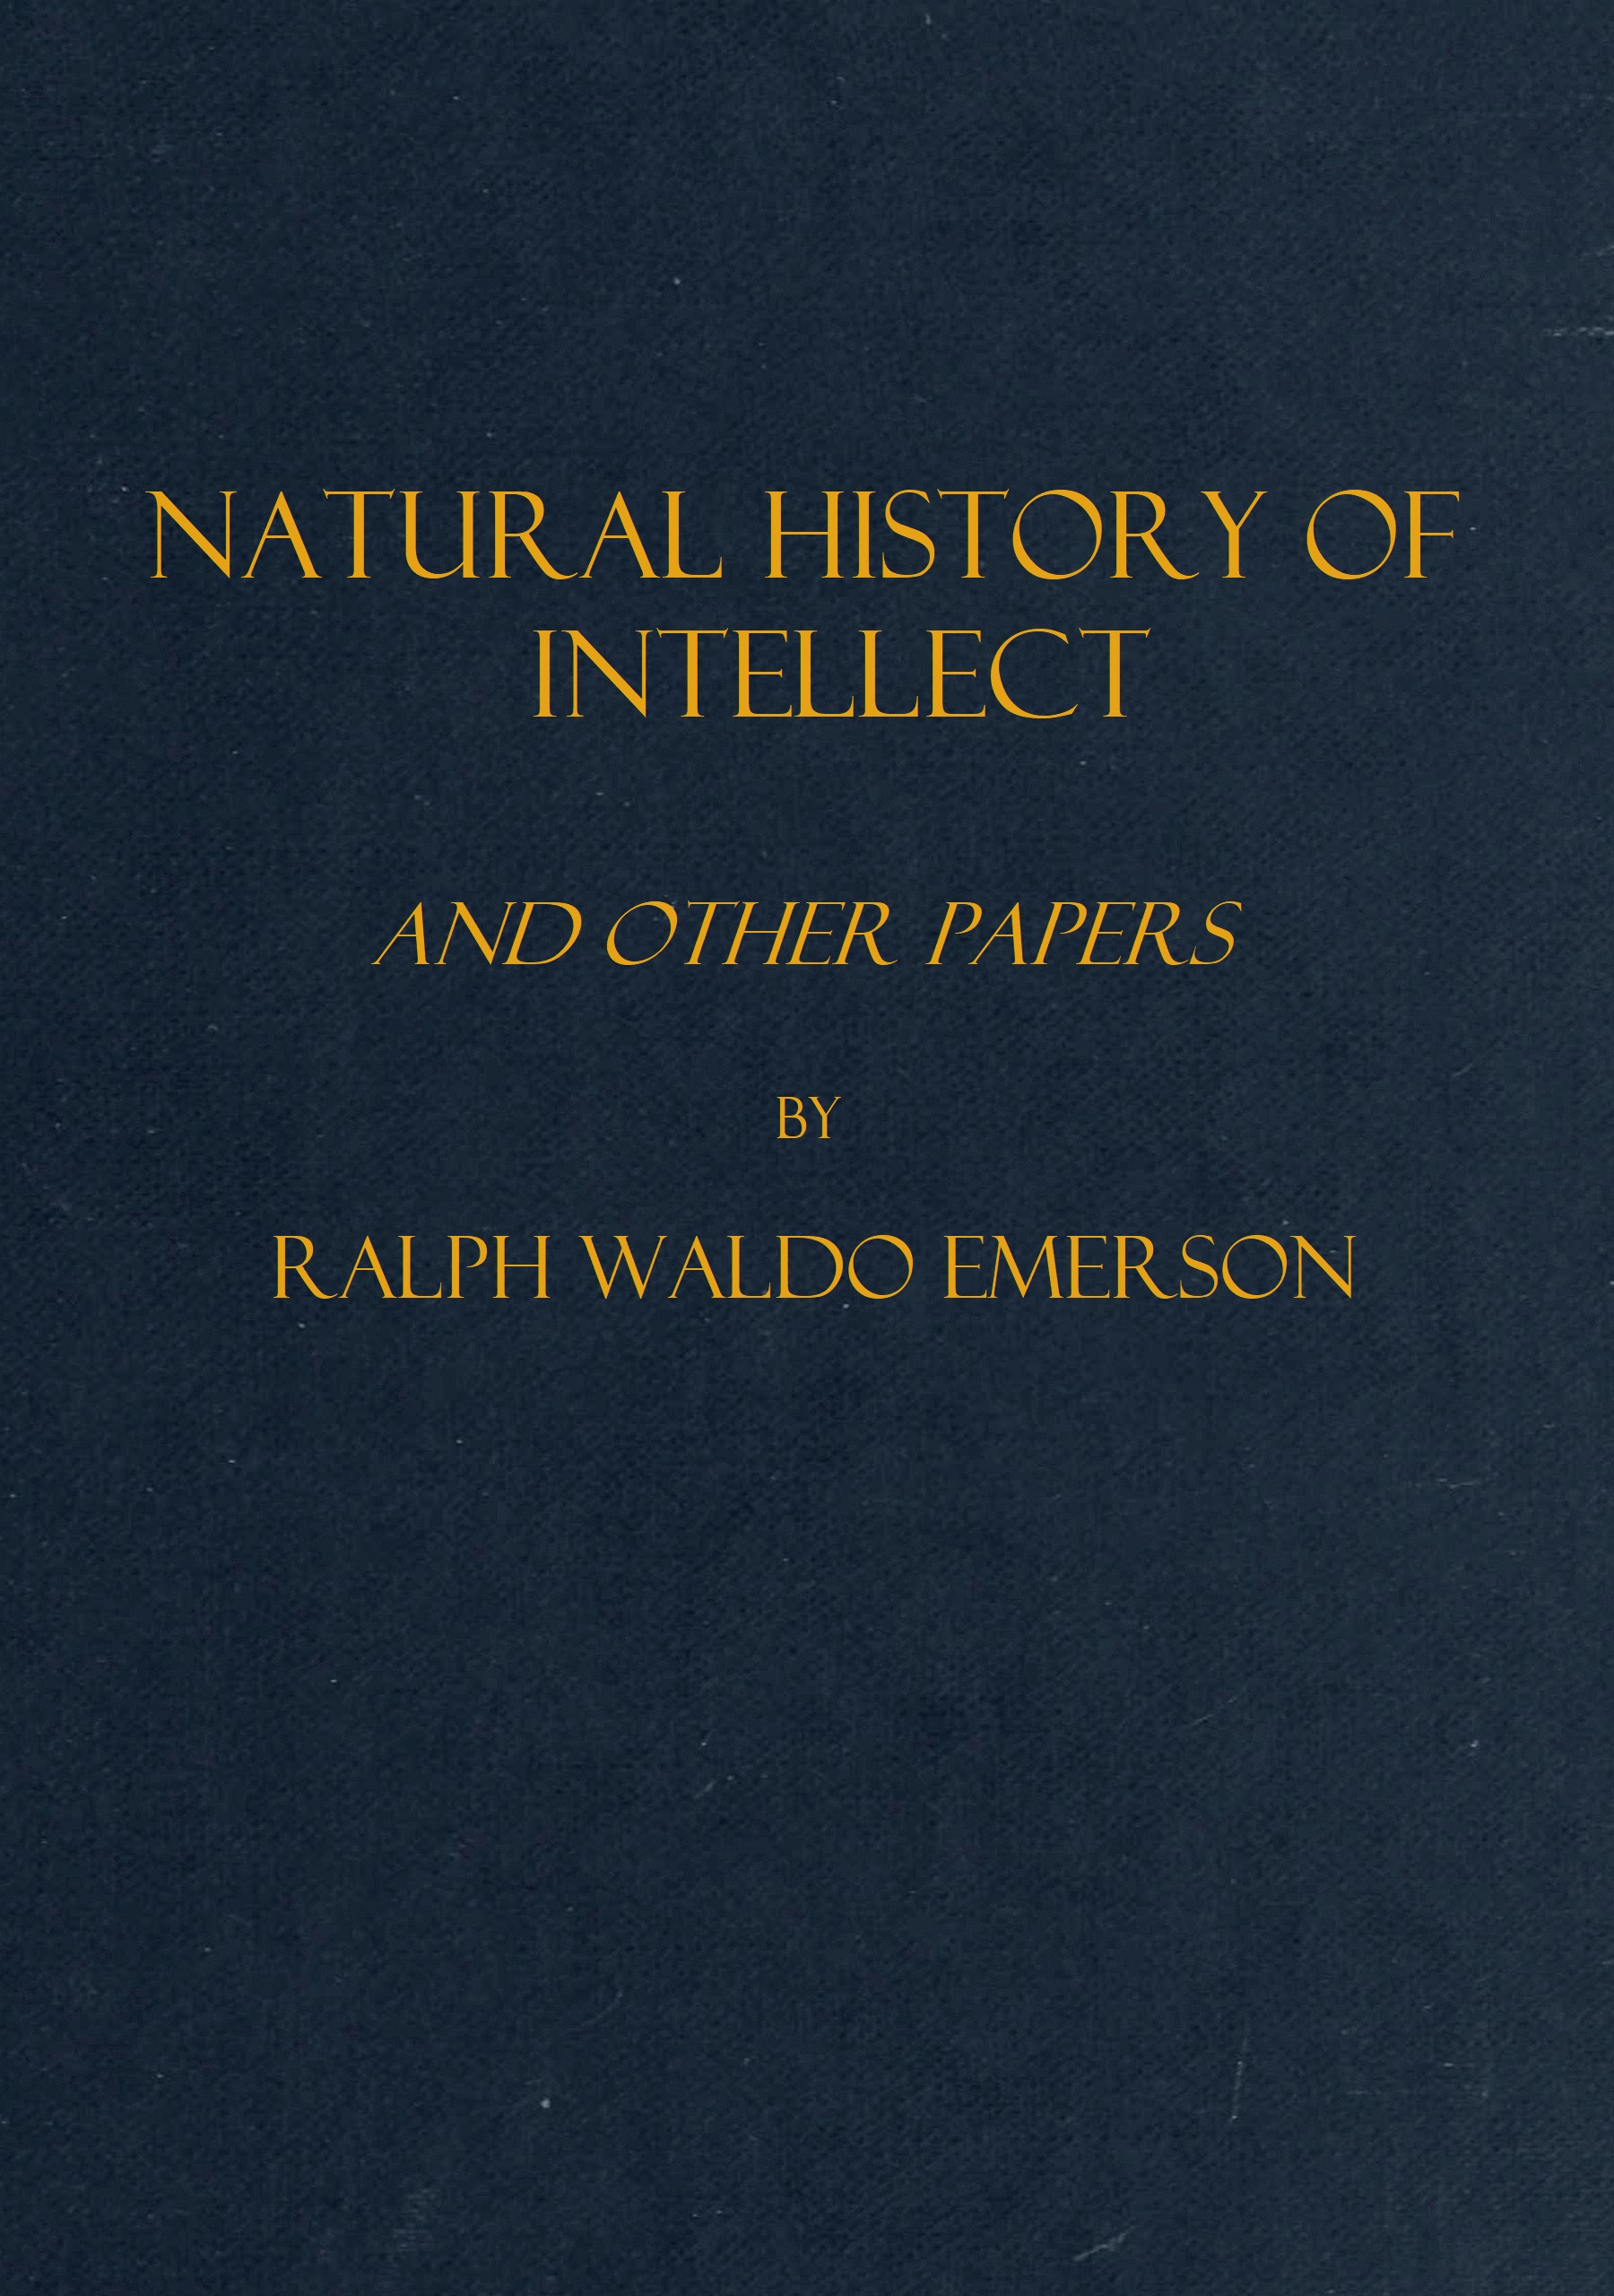 Natural history of intellect, and other papers